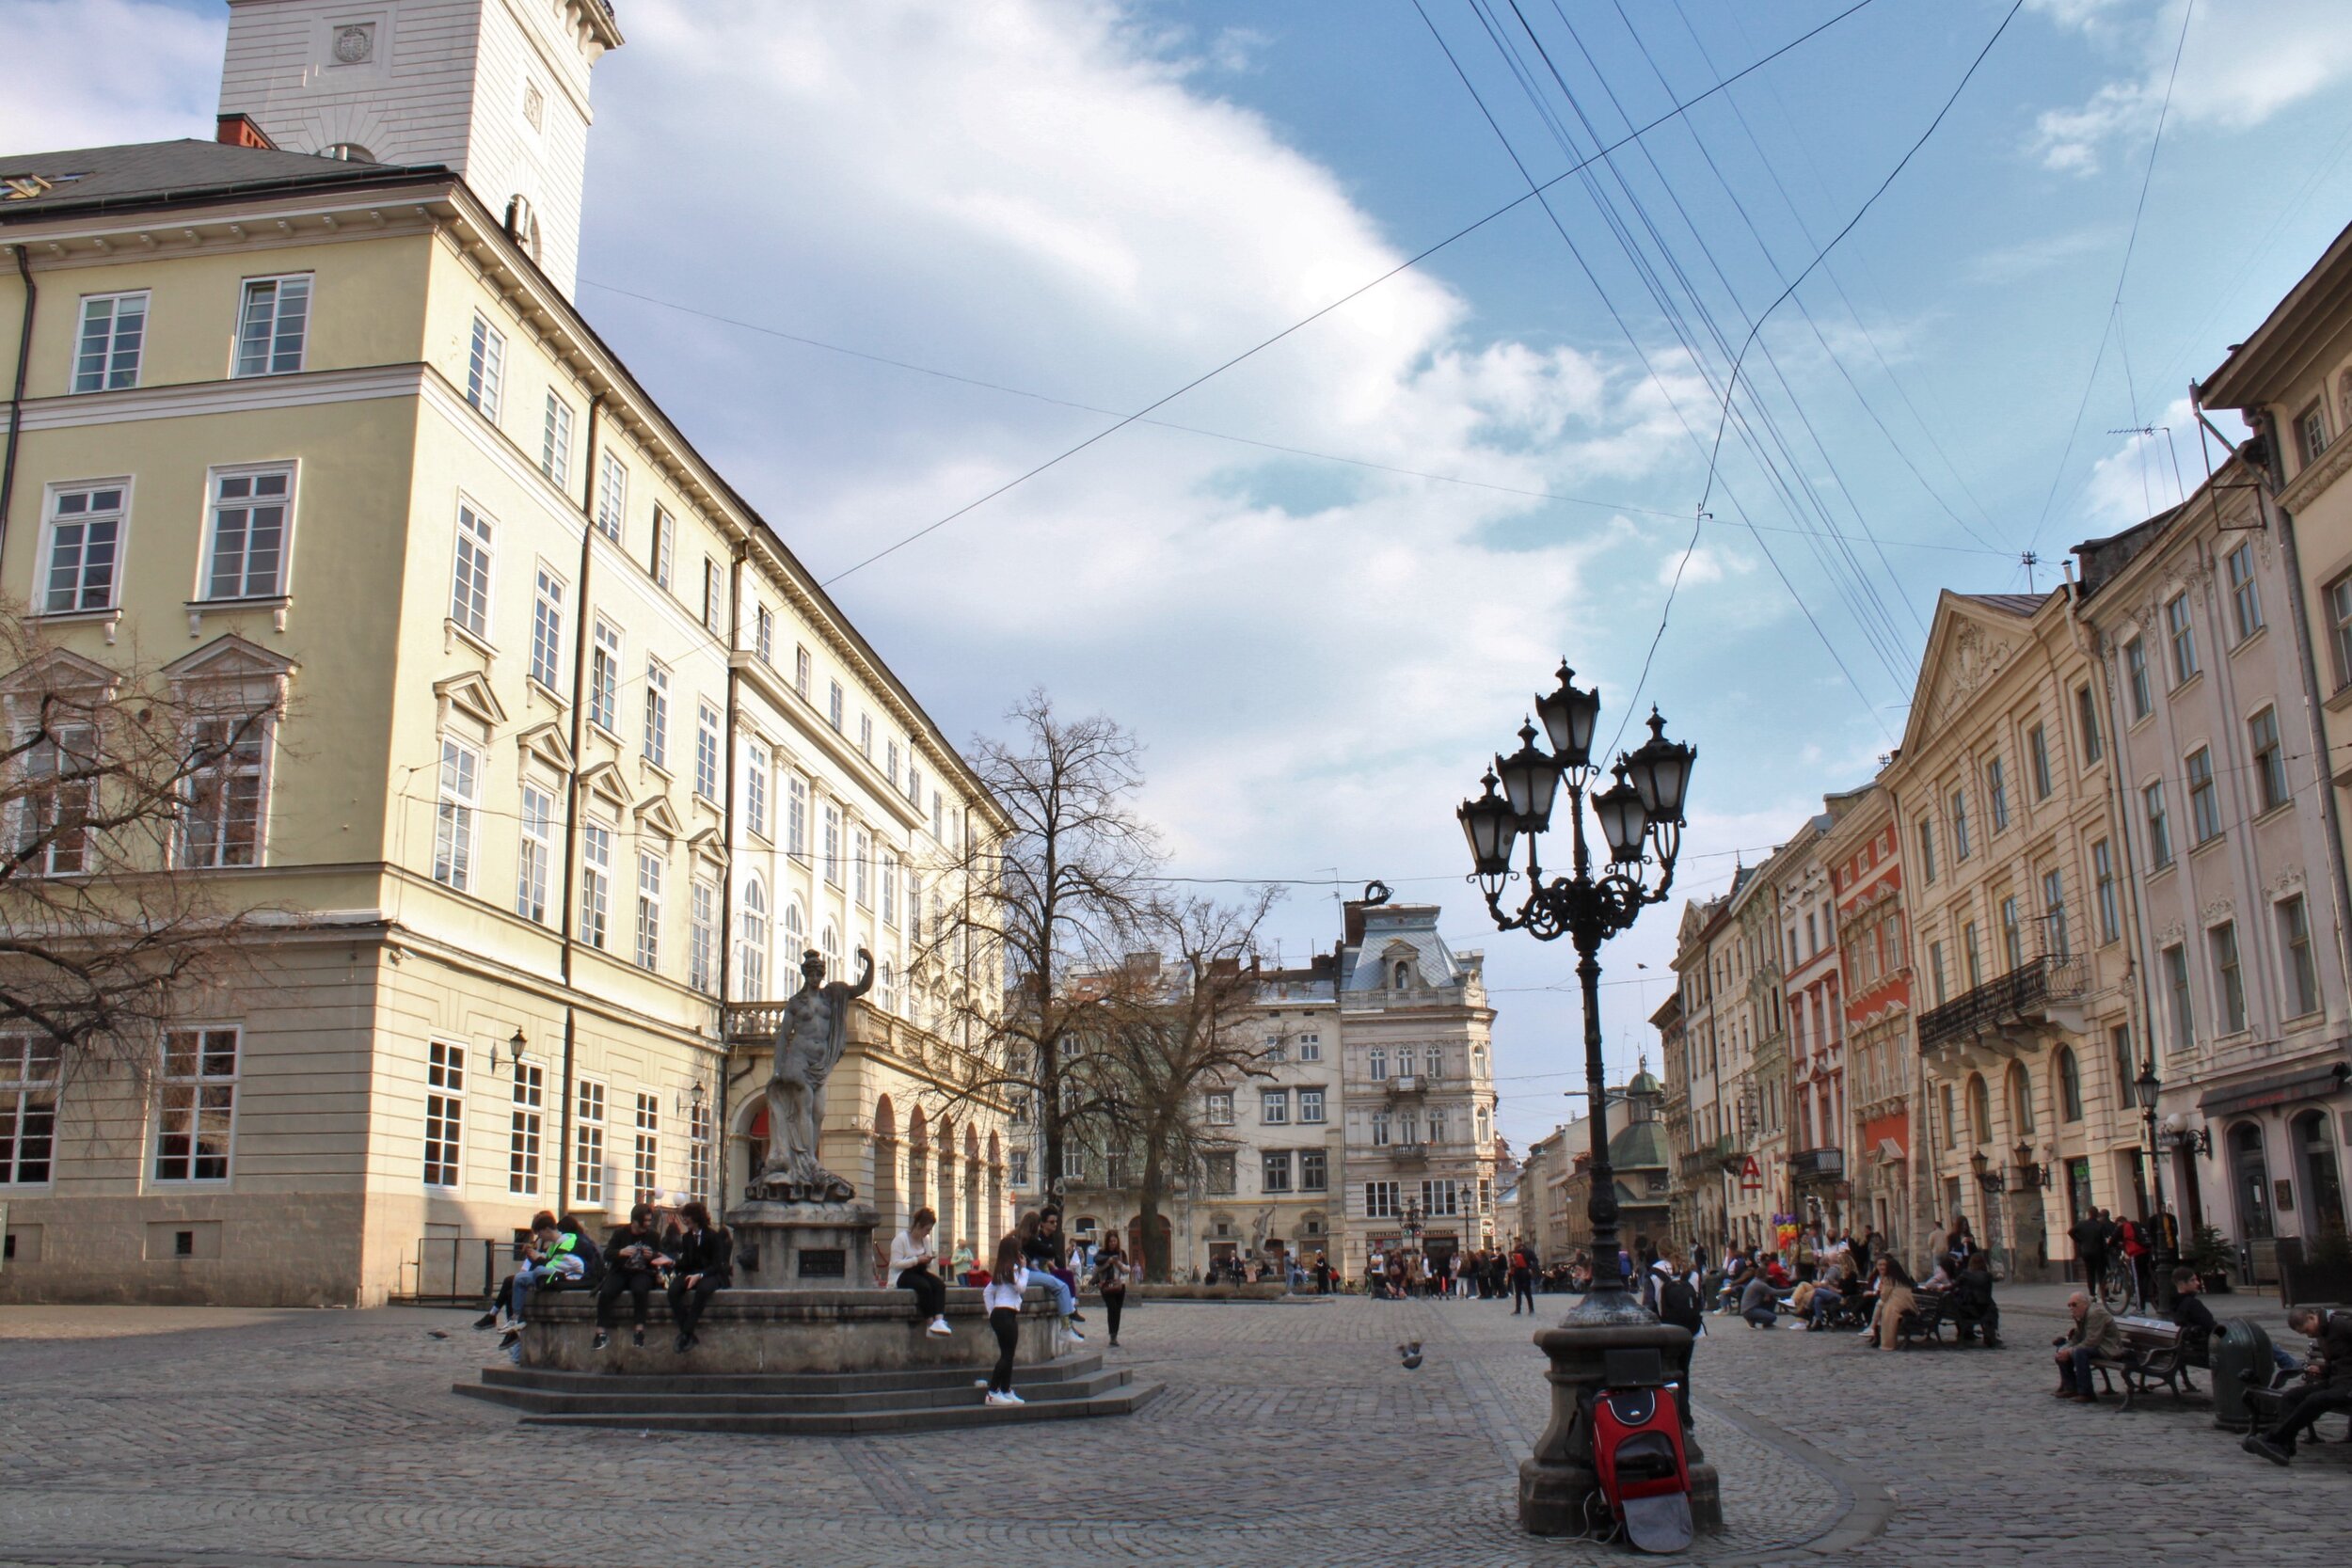 L’VIV, Ukraine. April 12th. 2021. PICTURED: “A truly European city,” L’viv’s Rynok Square is a popular meeting, shopping, and dining spot in the historic center of town.